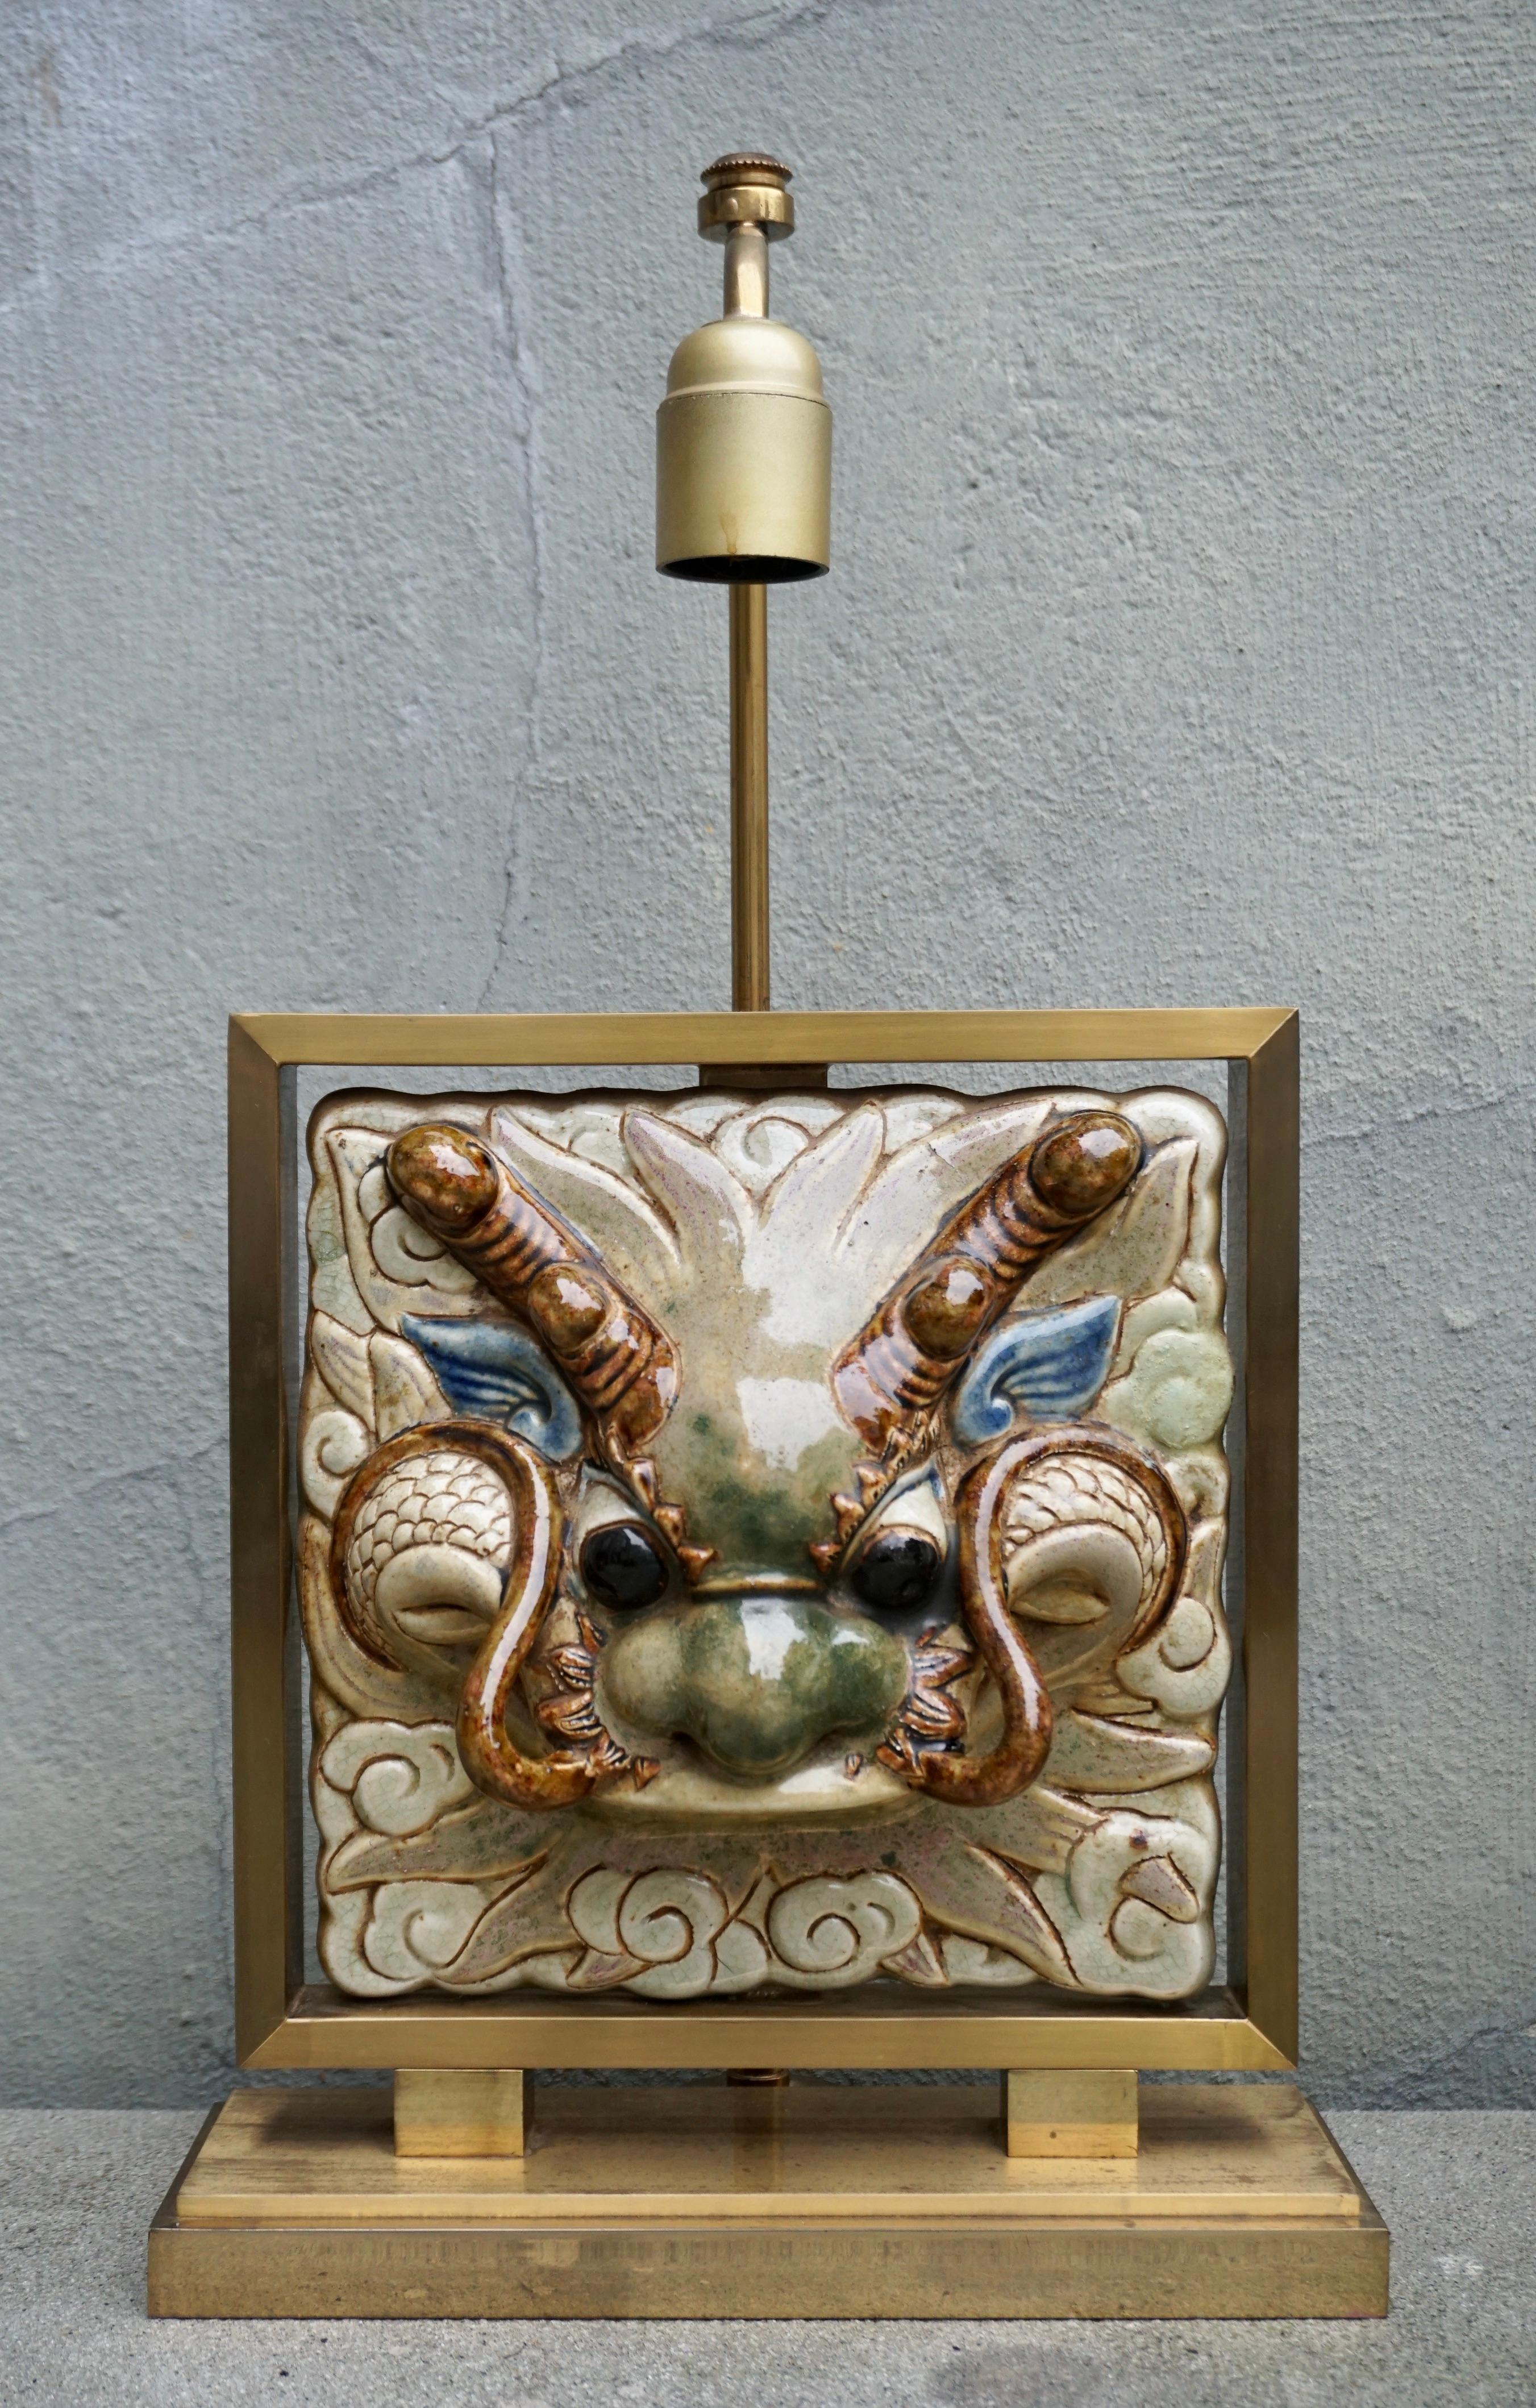 A rare beautiful table lamp with a ceramic dragon head.

Total height 50 cm.
Brass frame height 29 cm.